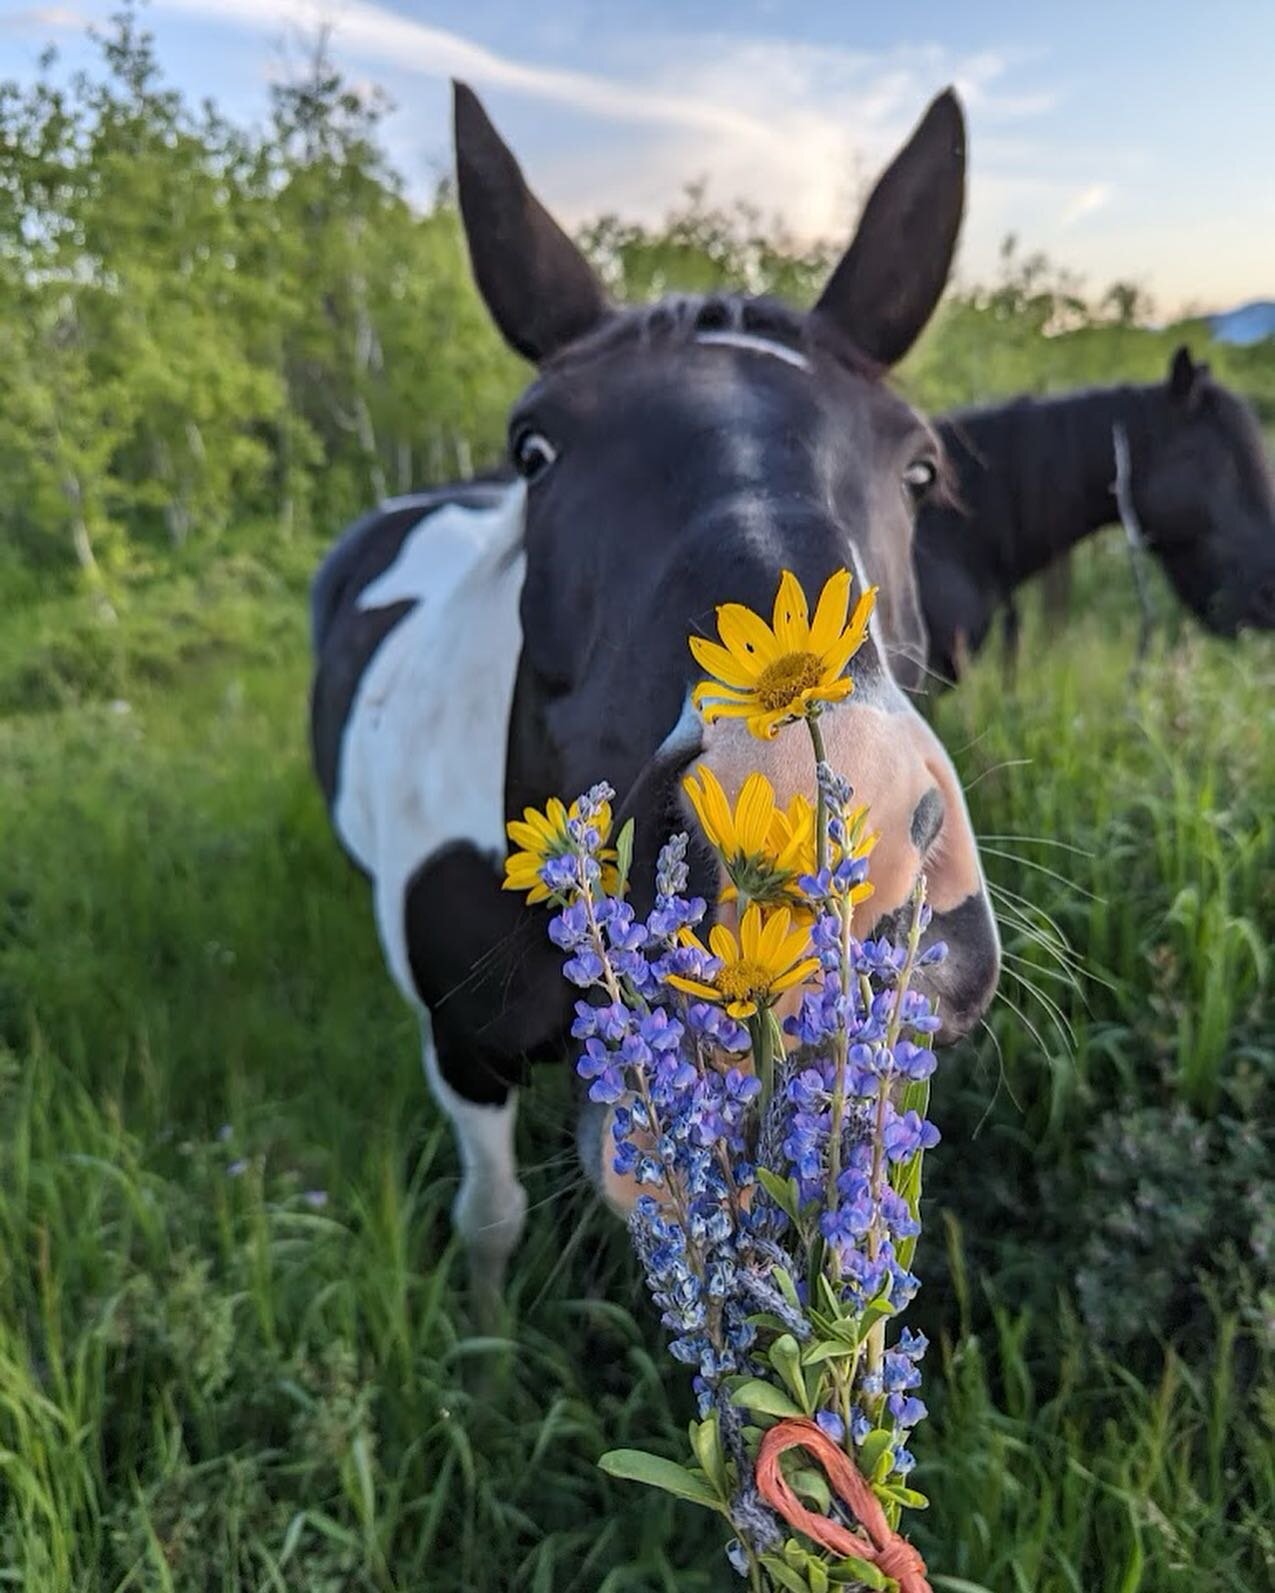 Happy First Day of Spring from JH Outfitting Company! Get out on a ride and come smell the flowers with one of our favorite horses Doc and our wranglers! Link in bio for more info.

www.jhoutfittingcompany.com 

#spring #flowers #horse #bucketlist #b